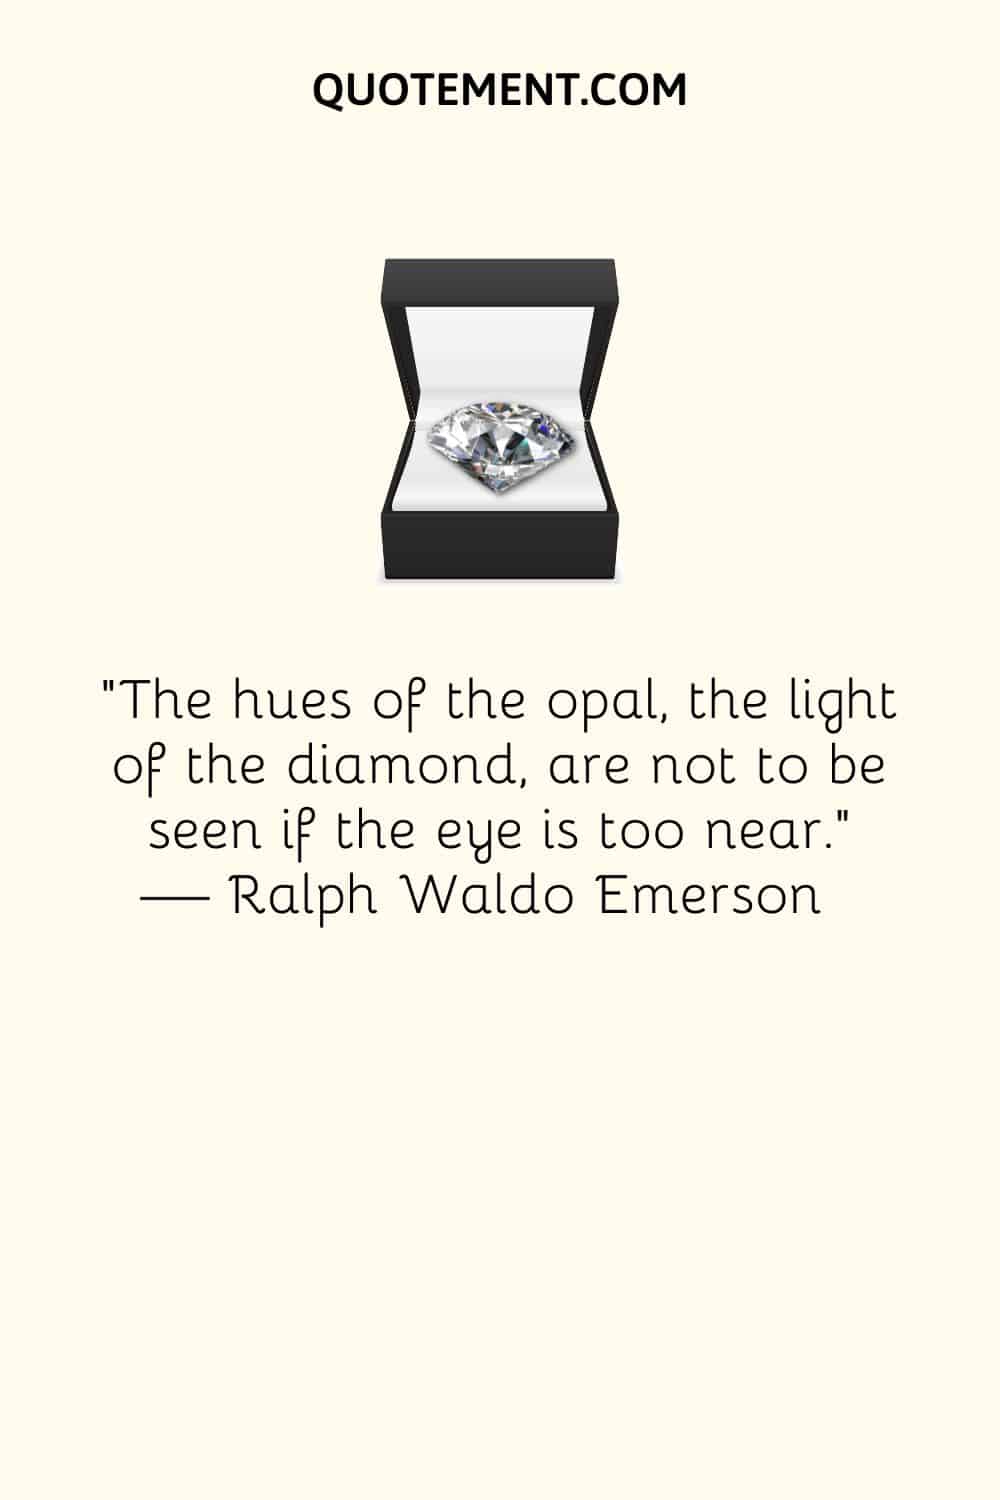 The hues of the opal, the light of the diamond, are not to be seen if the eye is too near